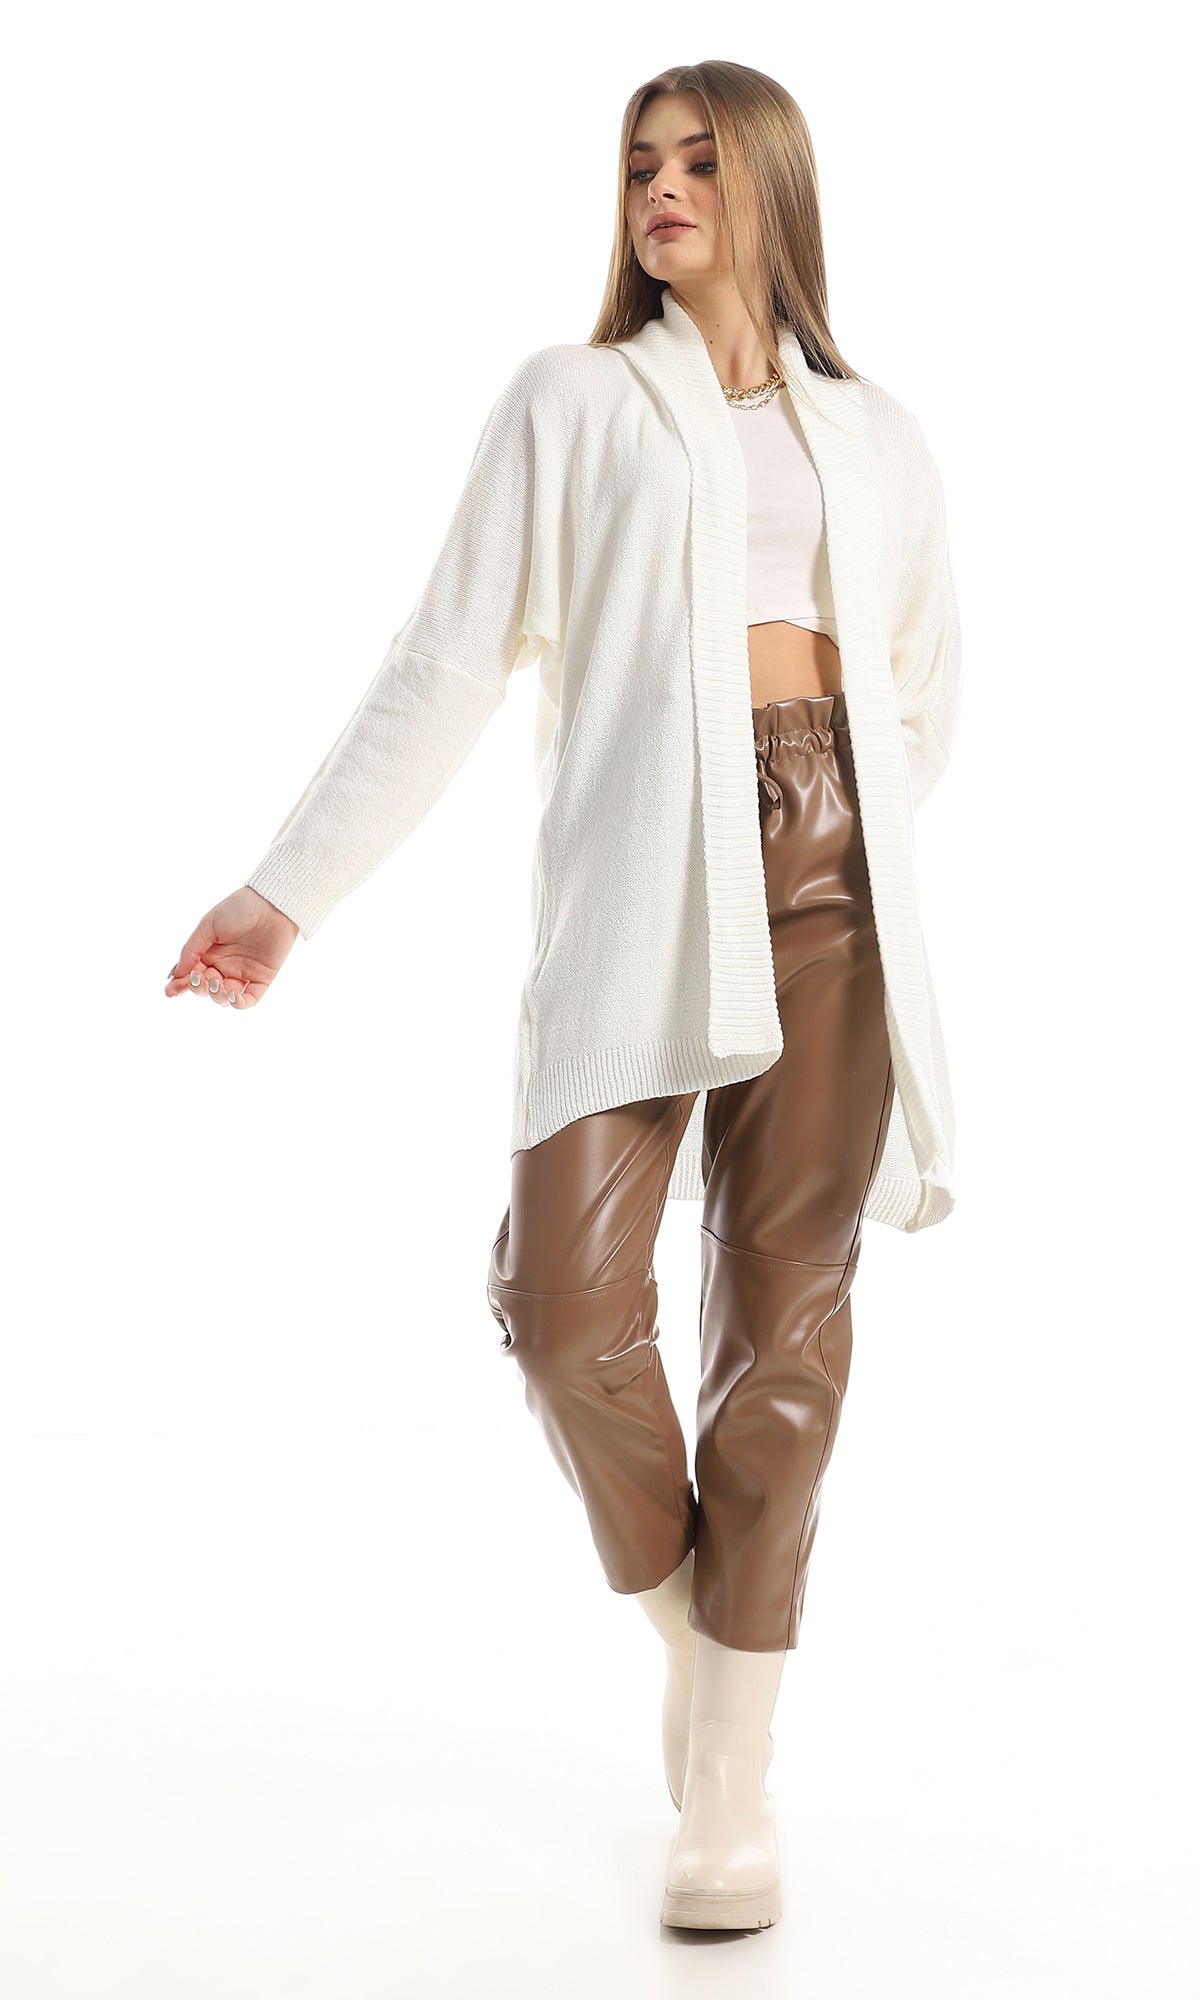 O157156 High Waist Leather Trousers With Adjustable Waist Drawstrings- Coffee